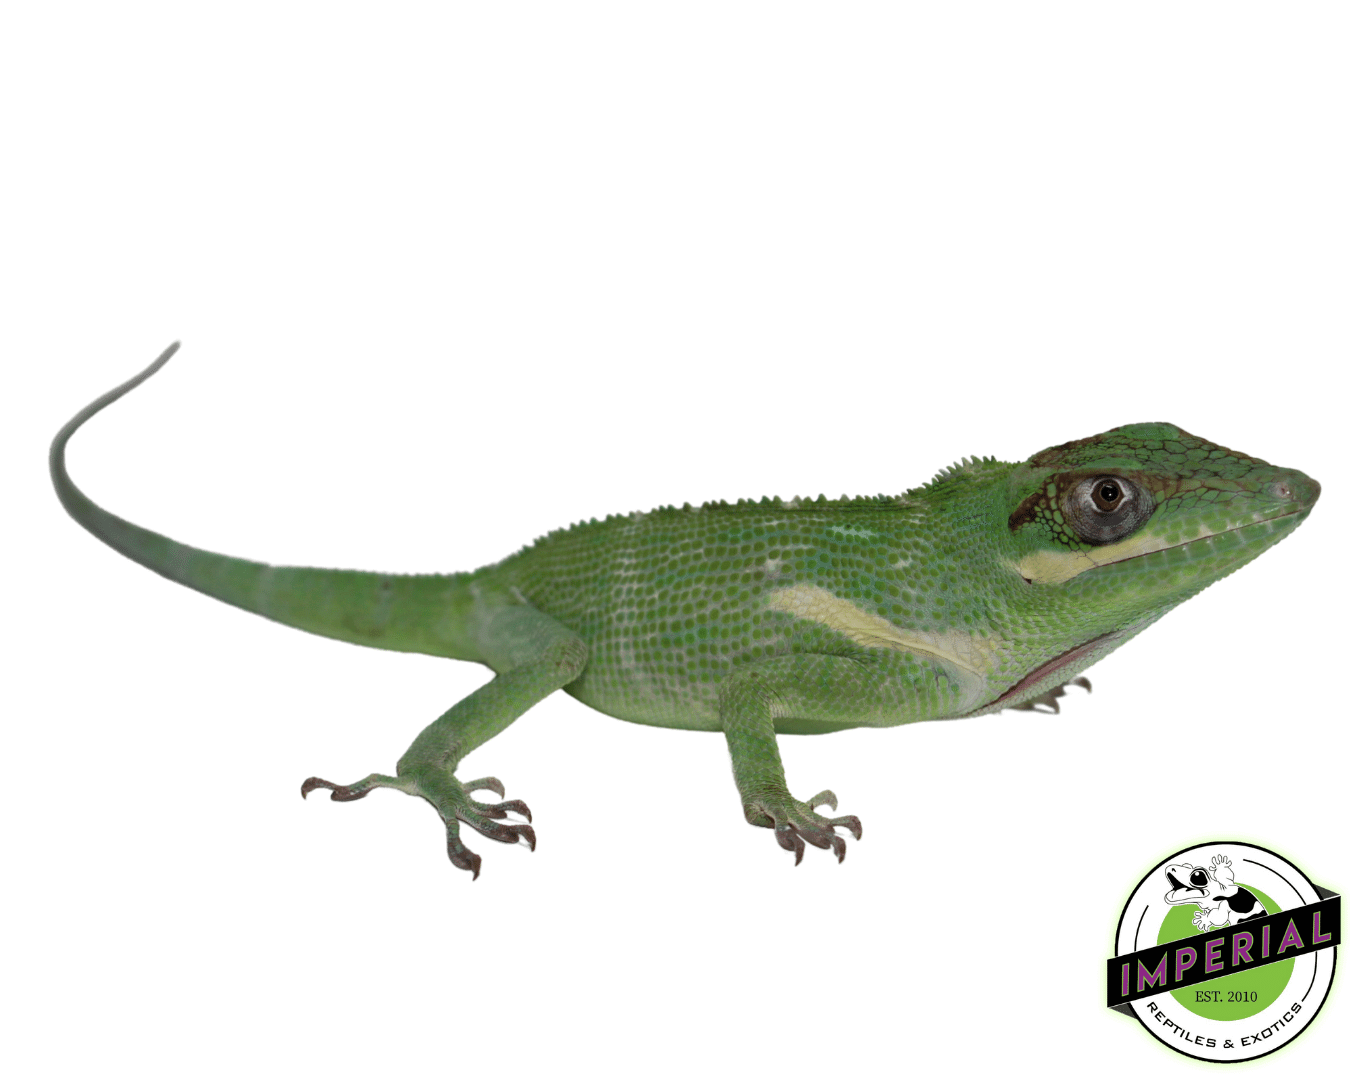 cuban knight anole for sale, buy reptiles online